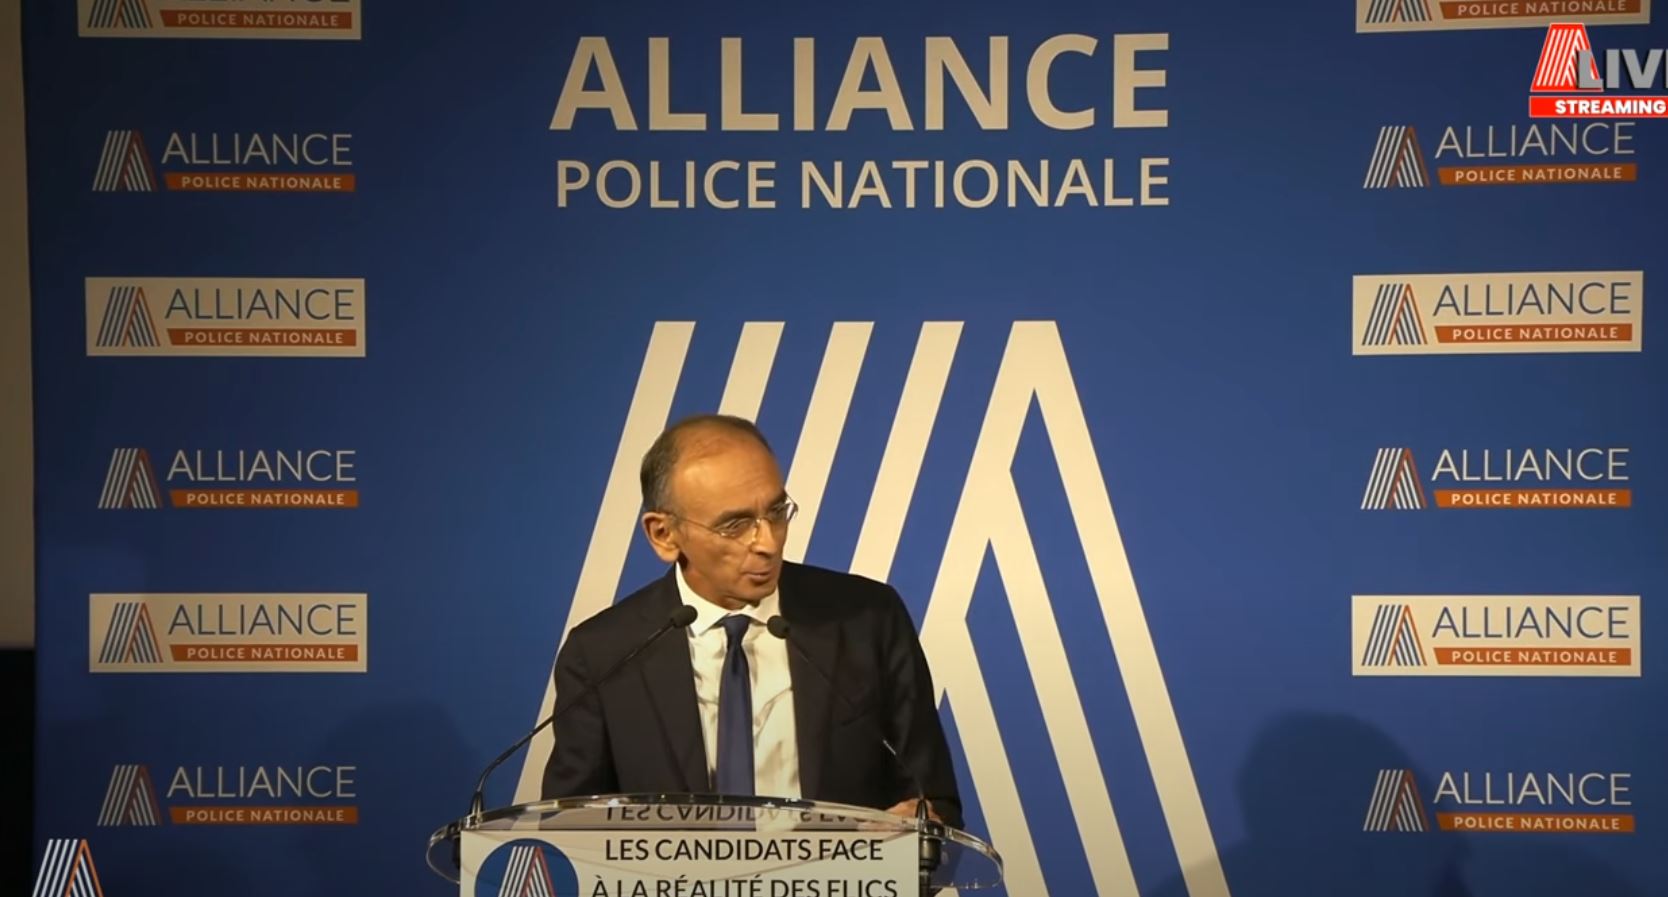 Alliance Police Nationale